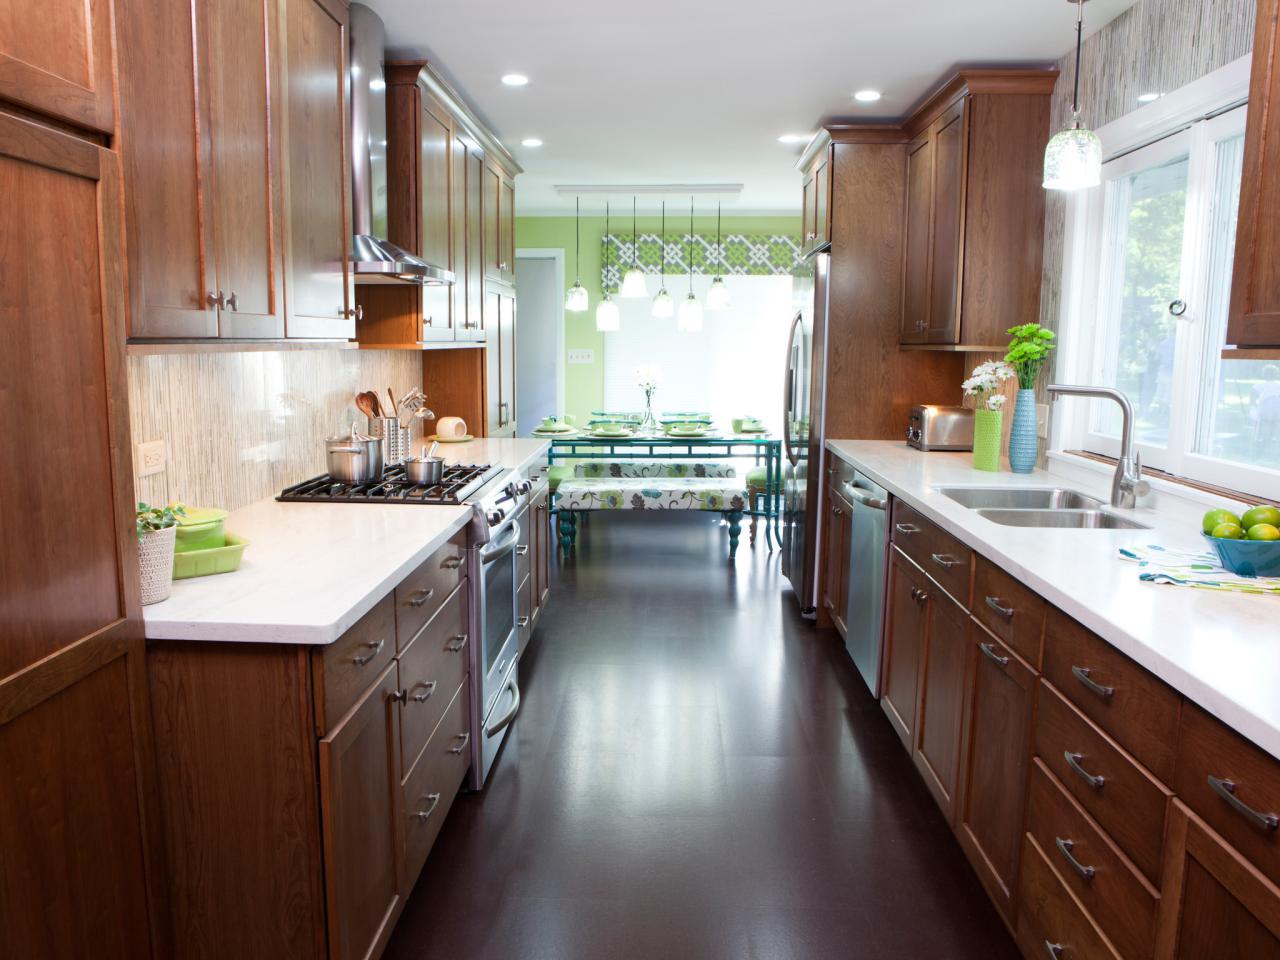 Kitchen Cabinet Options Pictures, Ideas & Tips From HGTV   HGTV